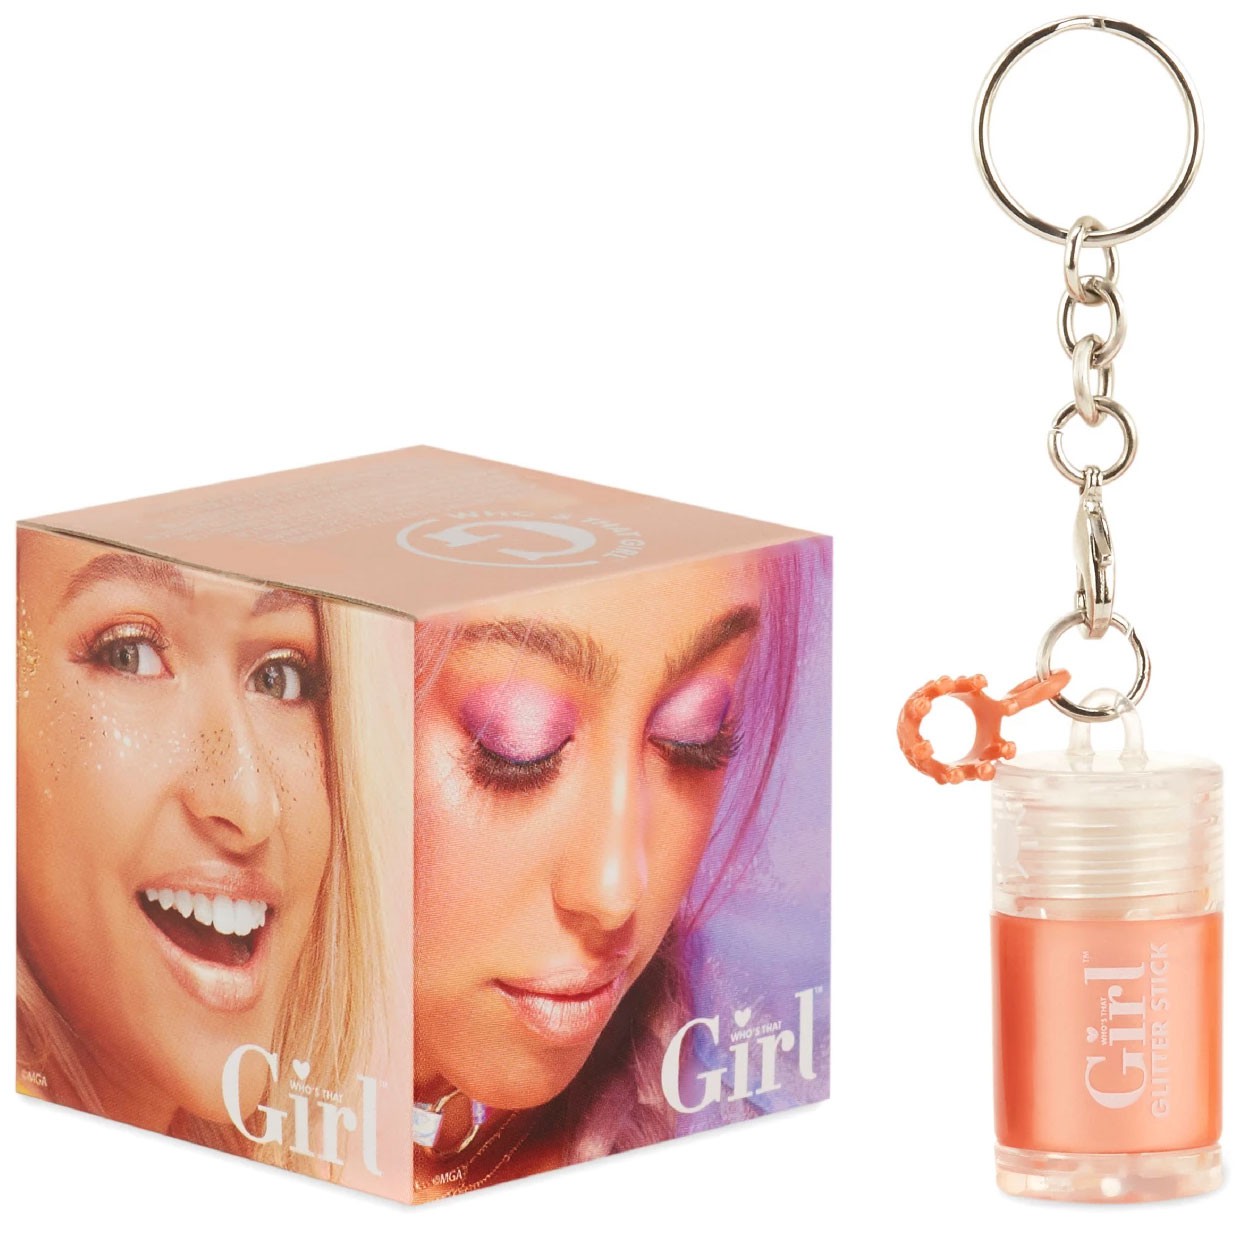 Who's That Girl Mini Makeup Mystery Pack with Keychain